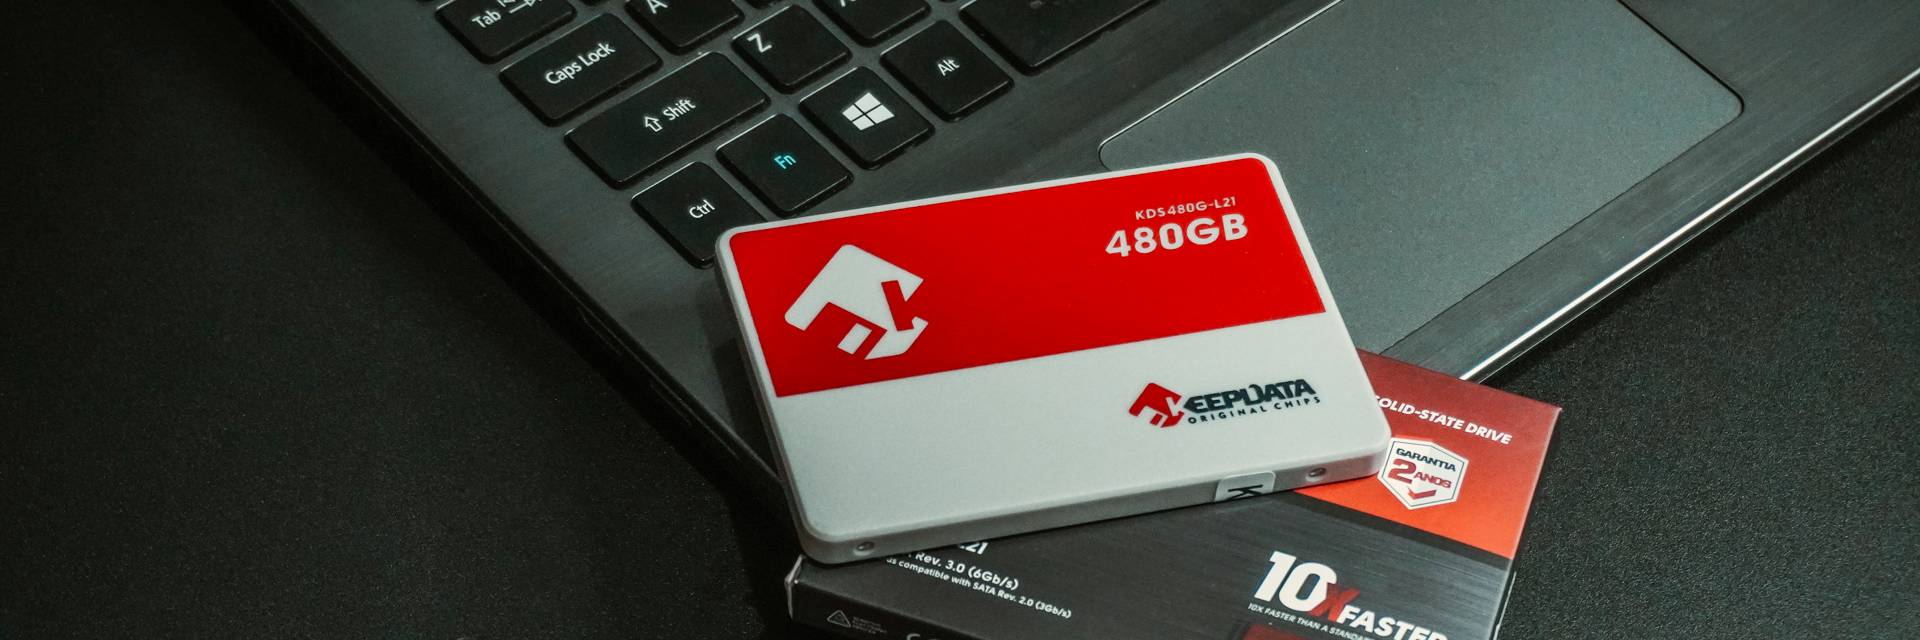 cover ssd3